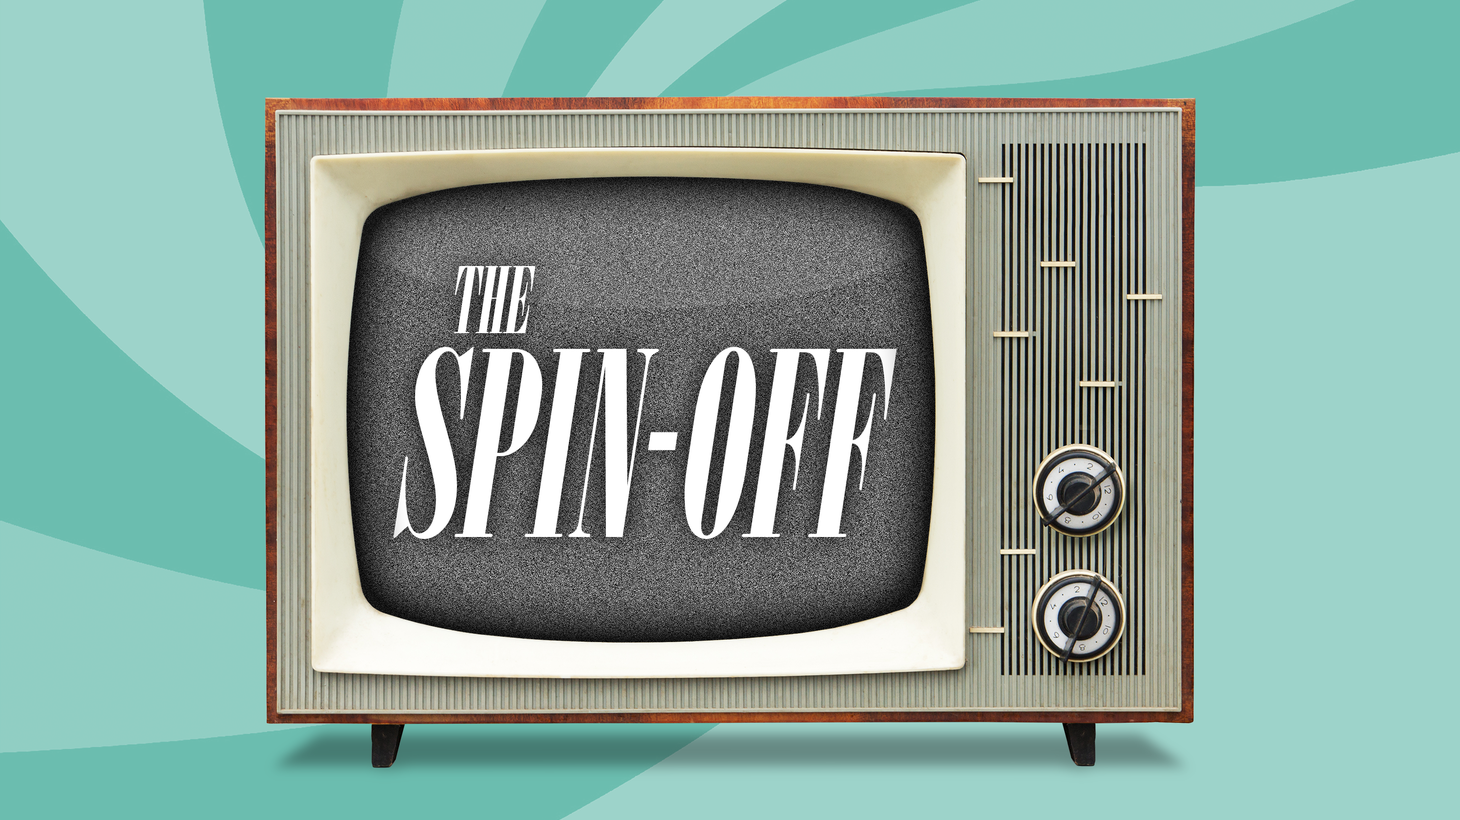 The Spin-off crew steps away from the 2016 Television Critics Association gathering to talk about prevailing themes at this year's TCA and look ahead to what the TV landscape may look like in the coming months.